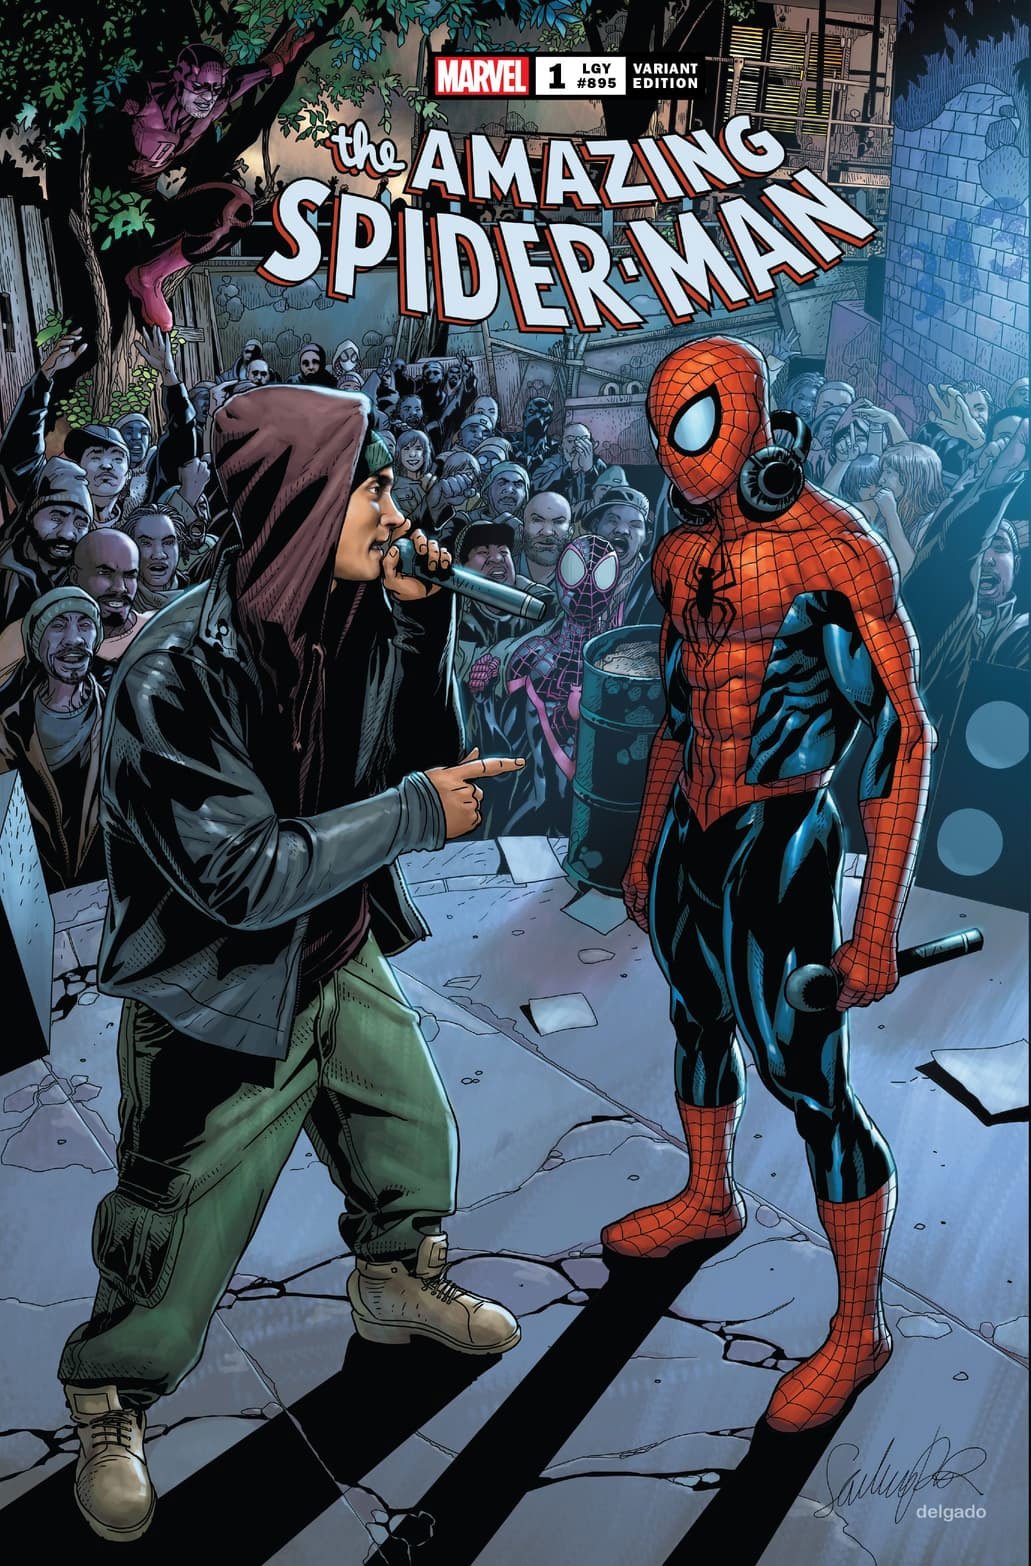 Marvel features Eminem on Spider-Man’s limited edition comic book cover